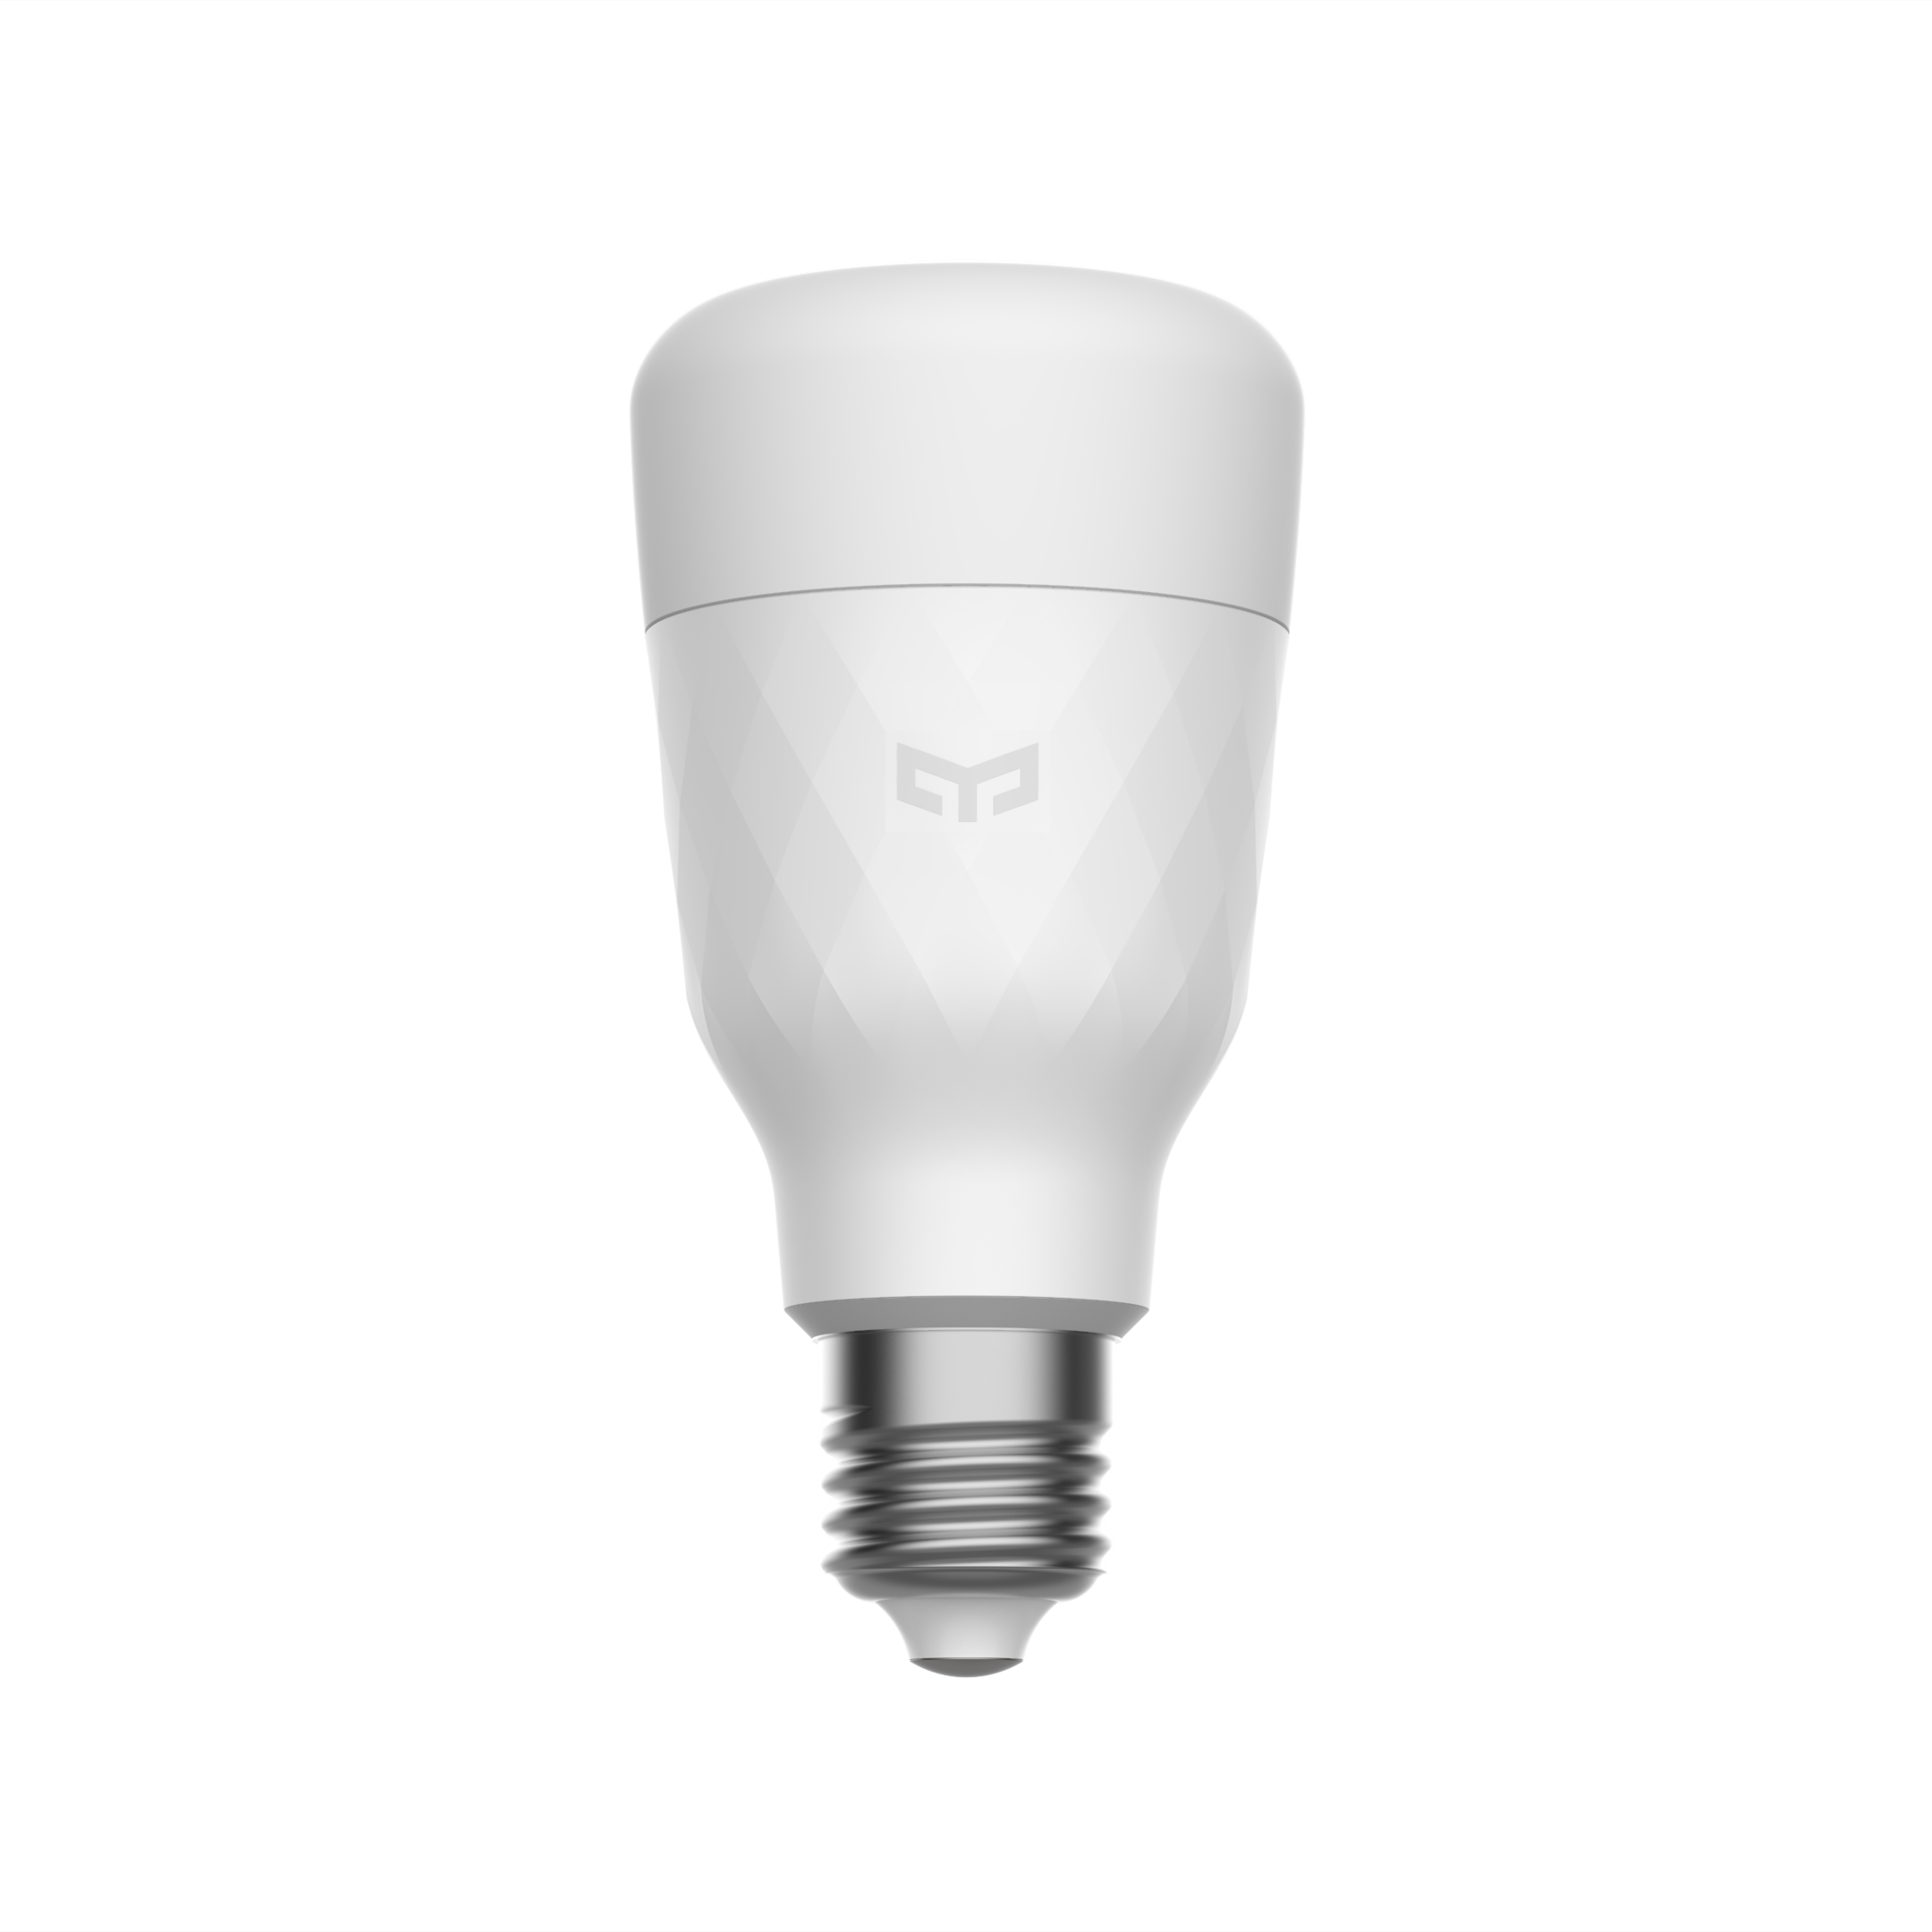 Yeelight YLDP007 Smart LED Bulb W3 (Dimmable) Voice/APP control Dimmable 2700K Warm Light